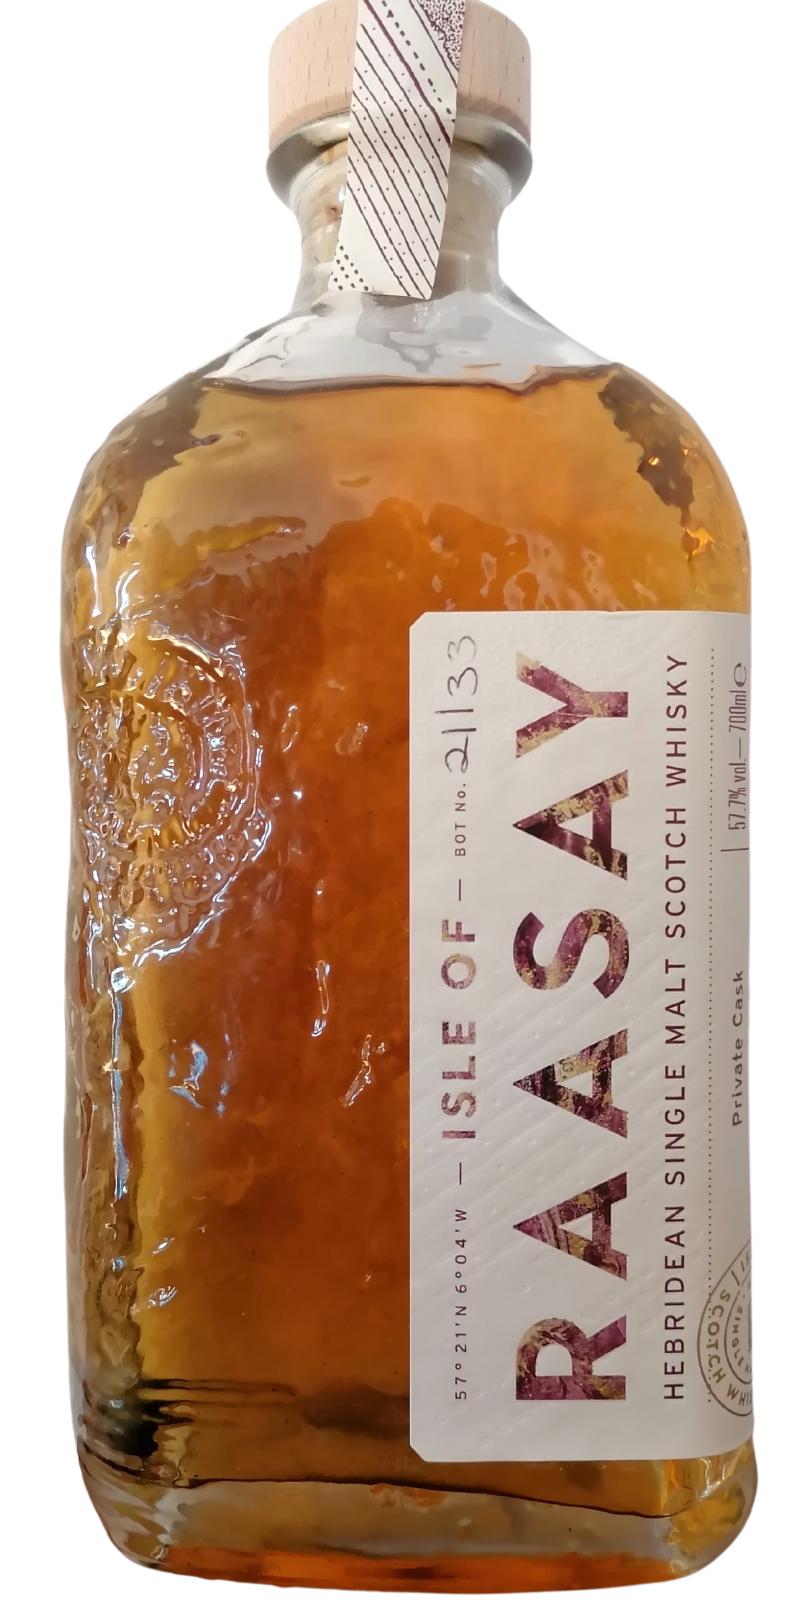 Raasay Unpeated Private Cask Private Cask 30l Oak Cask The Whiskyclan Cologne 57.7% 700ml